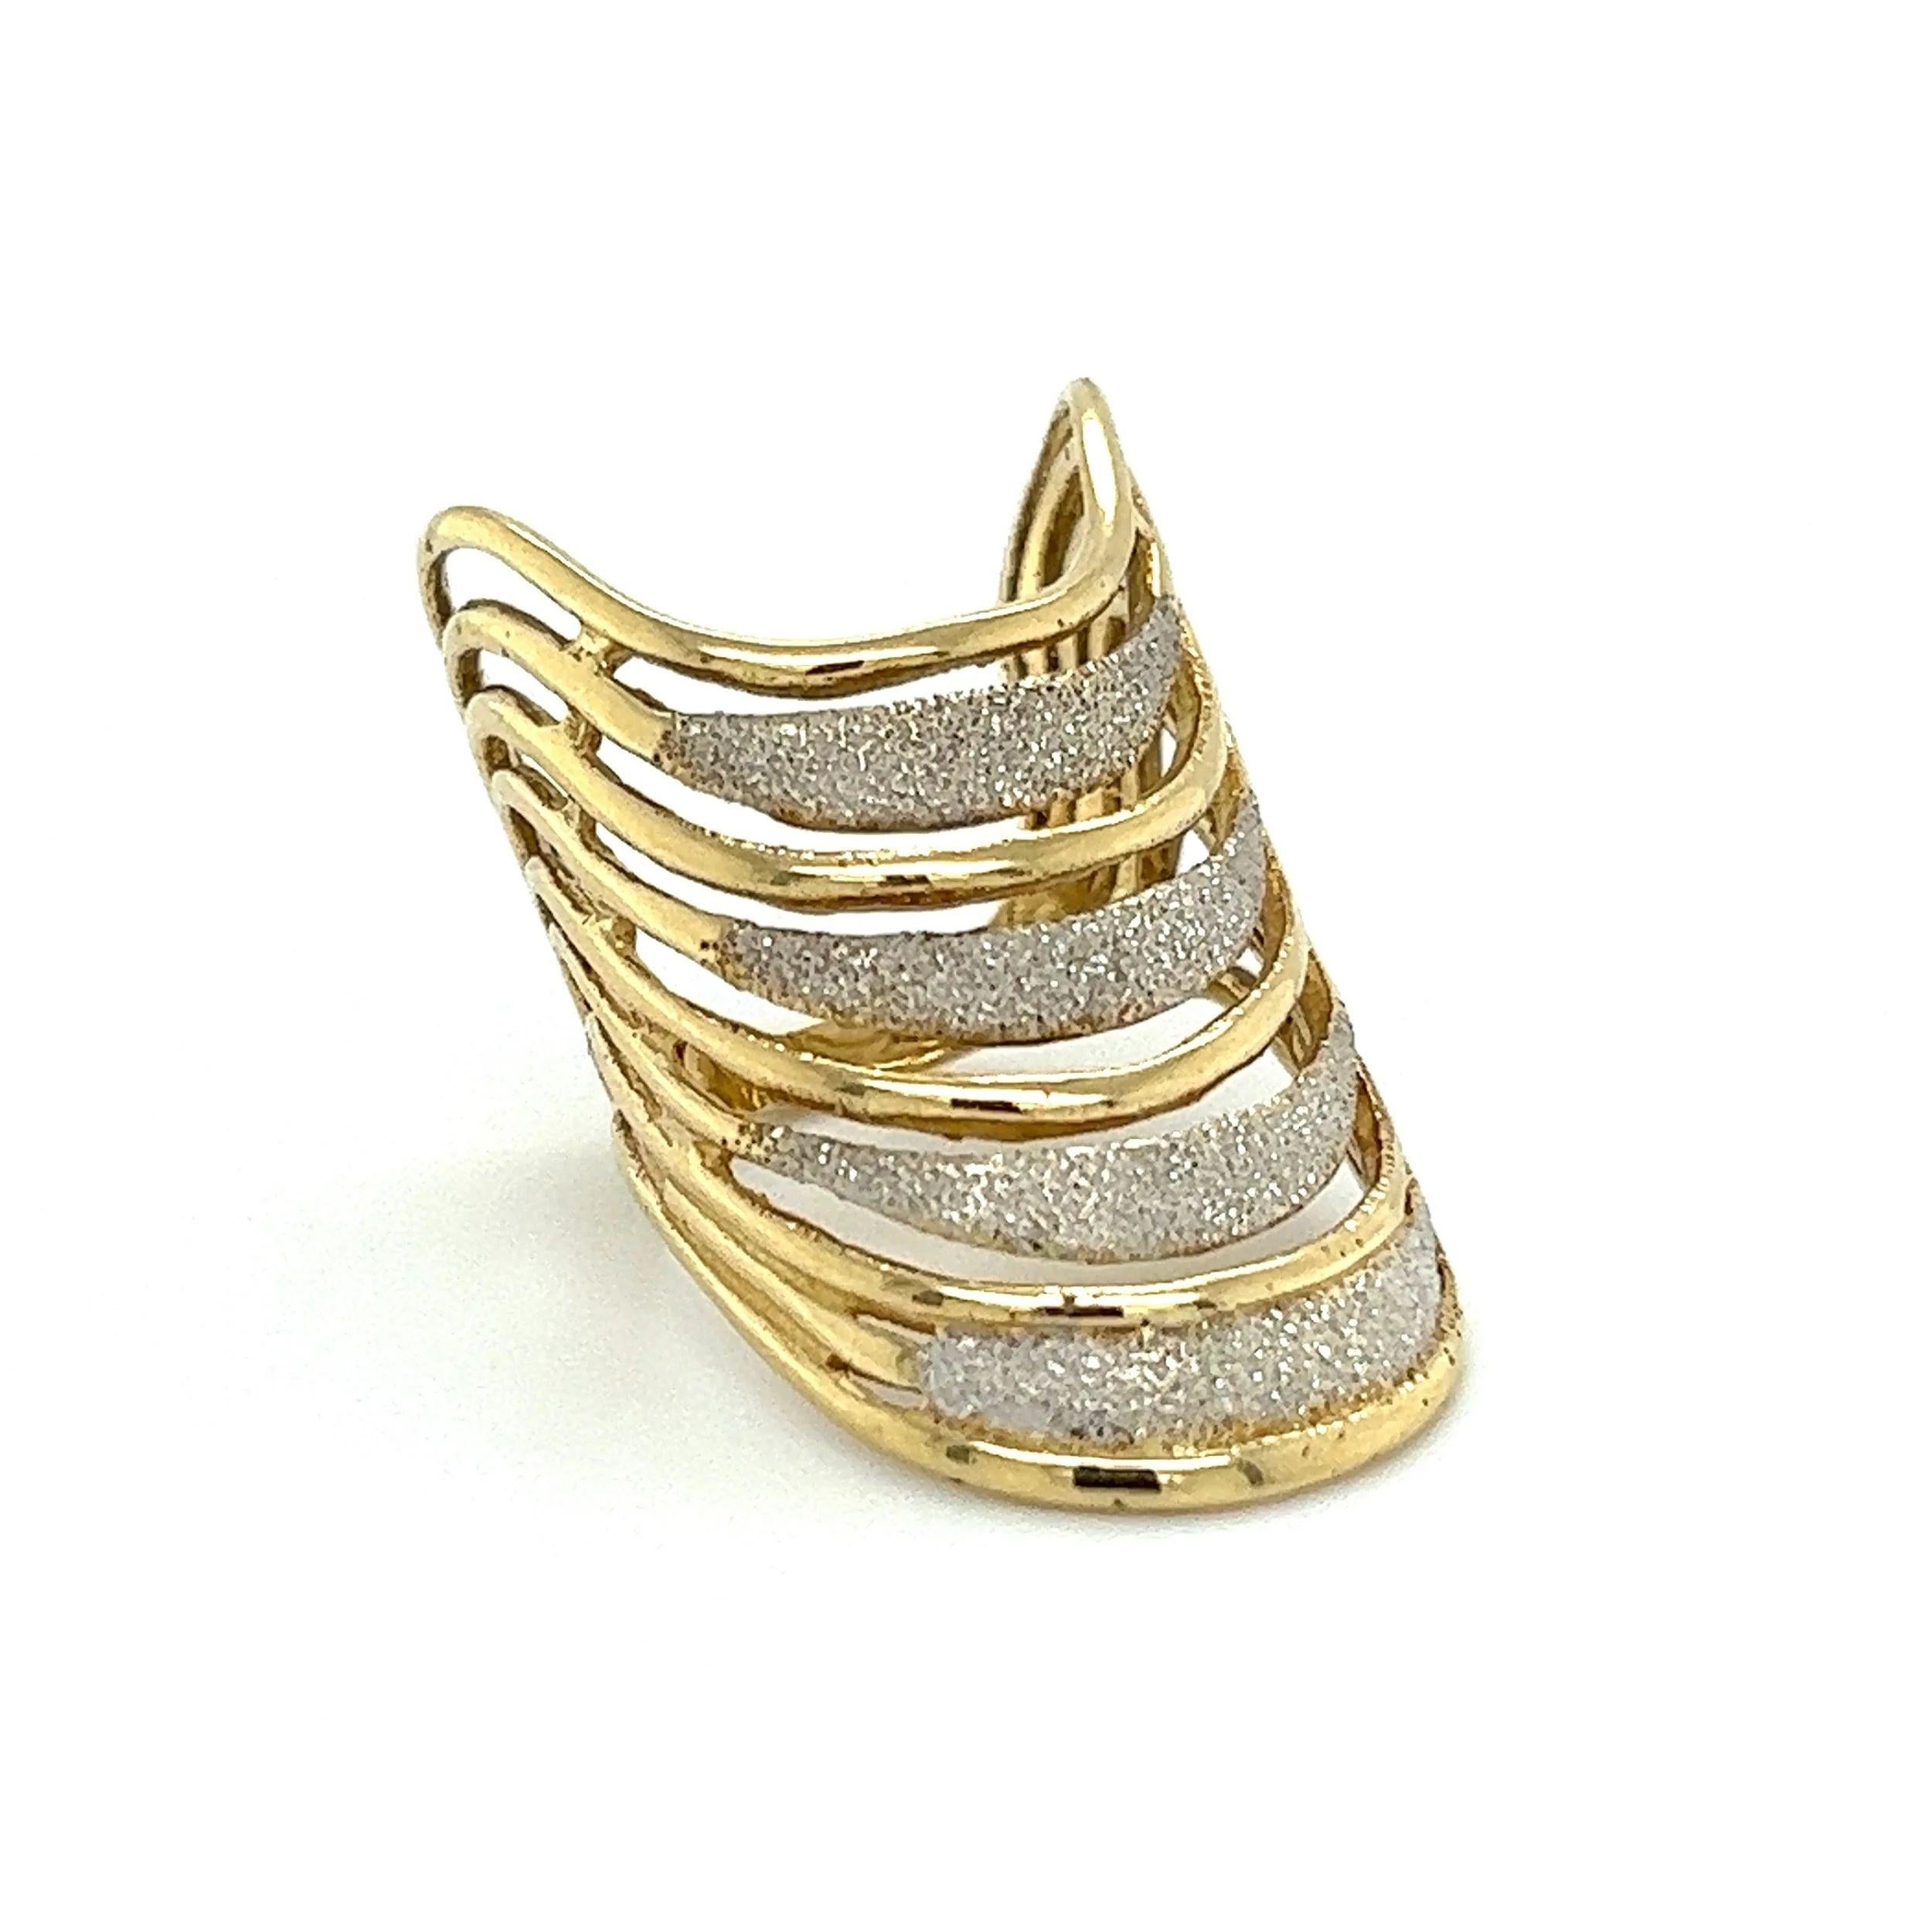 Simply Beautiful! Dynamic Designer Sand Blasted Gold Wave Four Row Band Cuff Ring. Each Band Hand crafted in Sand Blasted 14K Yellow Gold. Measuring approx. 1.20” l x 0.76” w x 0.77” h. Ring size 6.5, we offer ring resizing. More Beautiful in Real